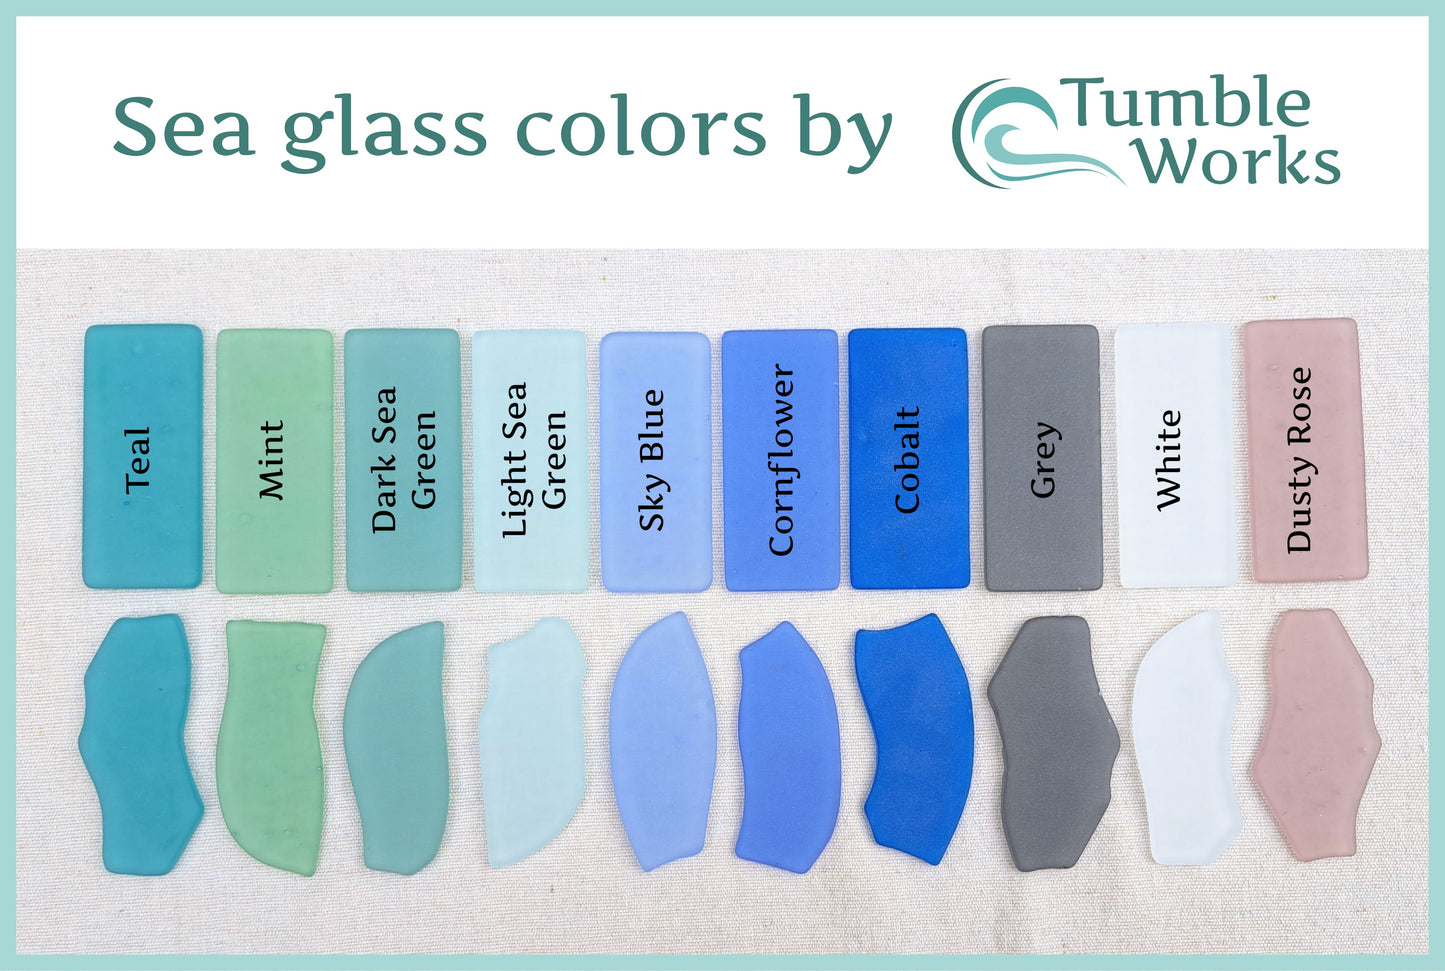 Sea glass ornament blanks - Set of 10 - Assorted Colors